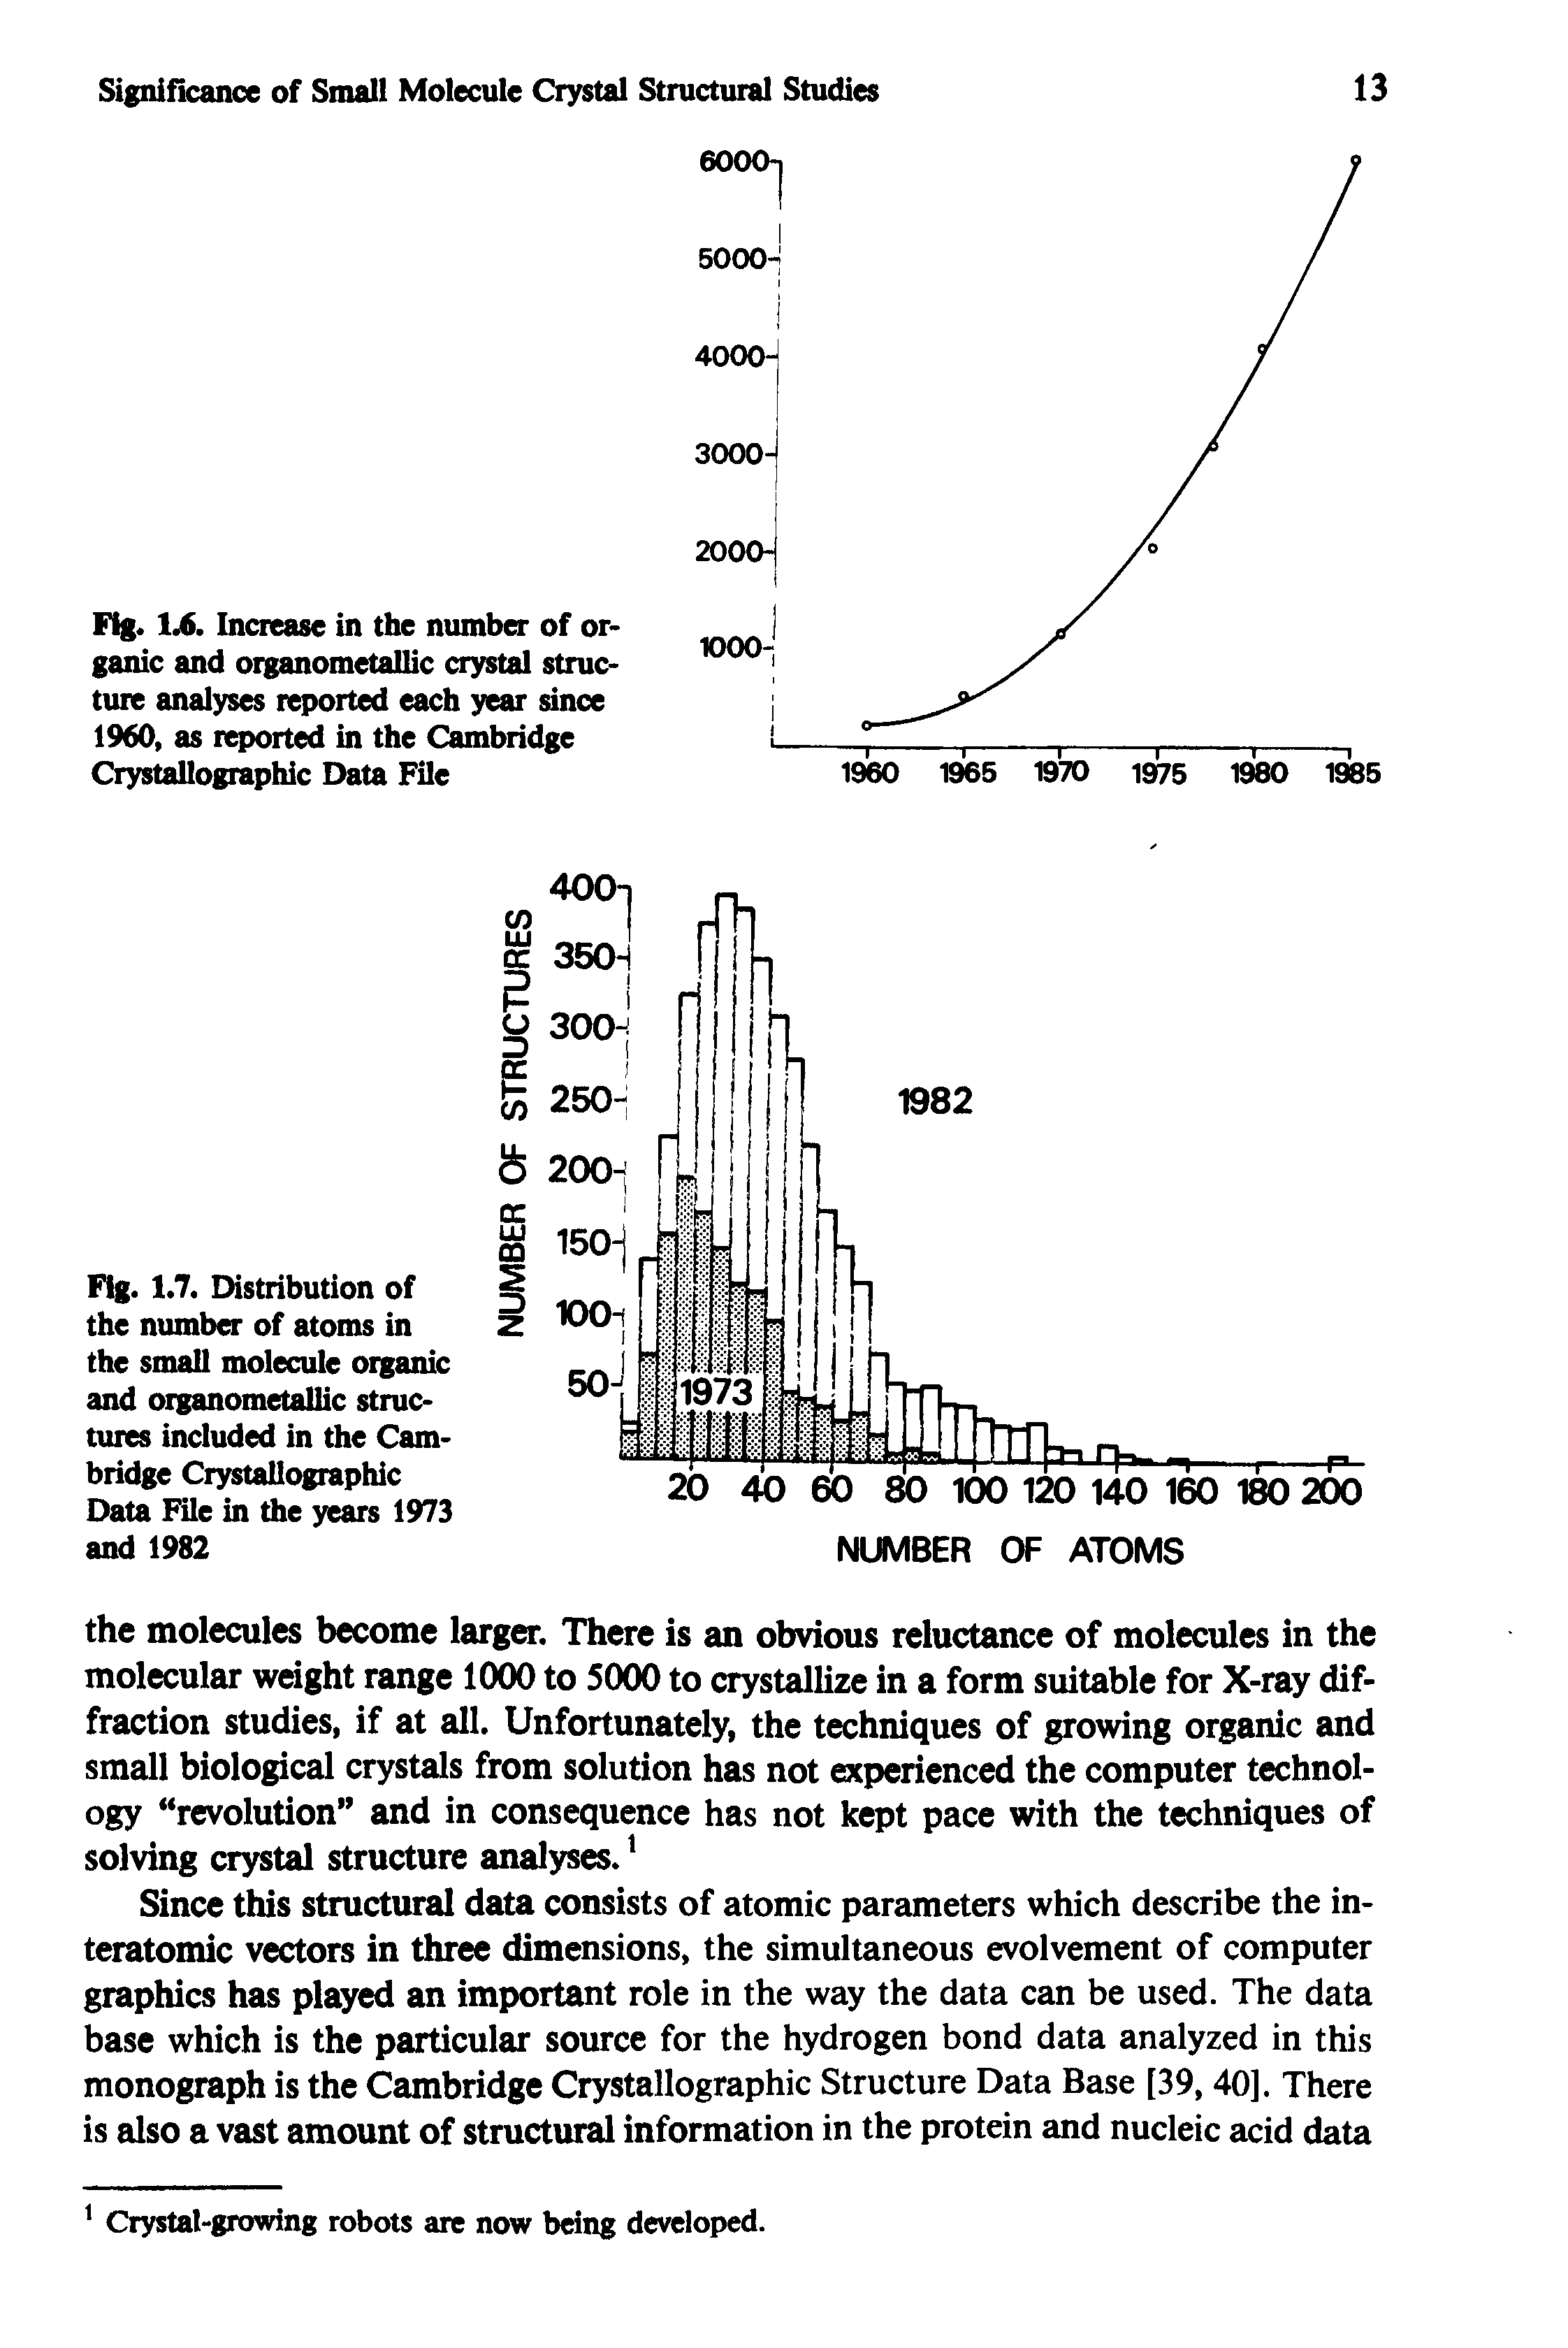 Fig. 1.6. Increase in the number of organic and organometallic crystal structure analyses reported each year since 1960, as reported in the Cambridge Crystallographic Data File...